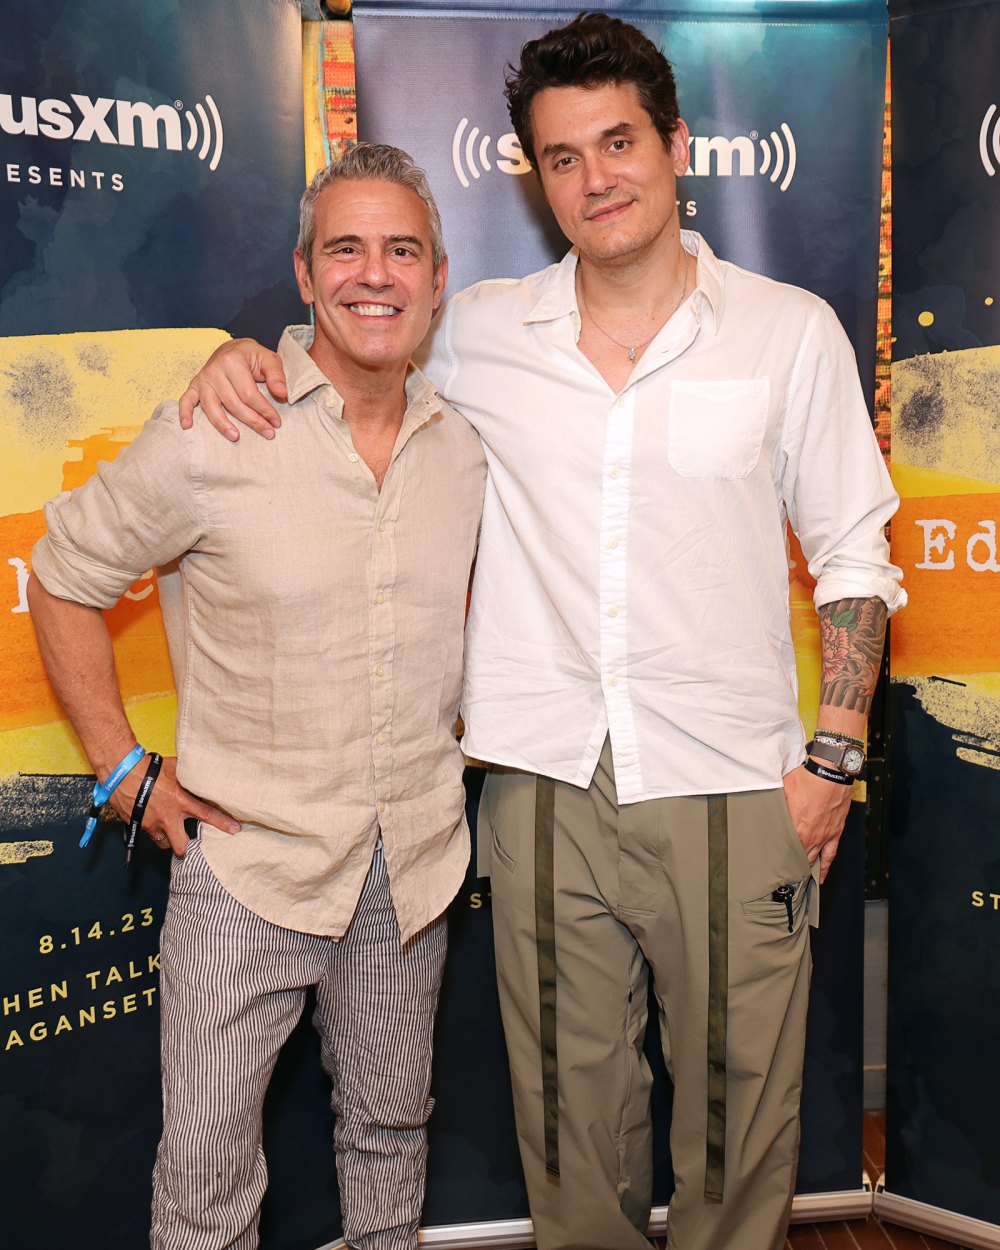 John Mayer Defends 'Platonic' Friendship With Andy Cohen After 'Intense Speculation'